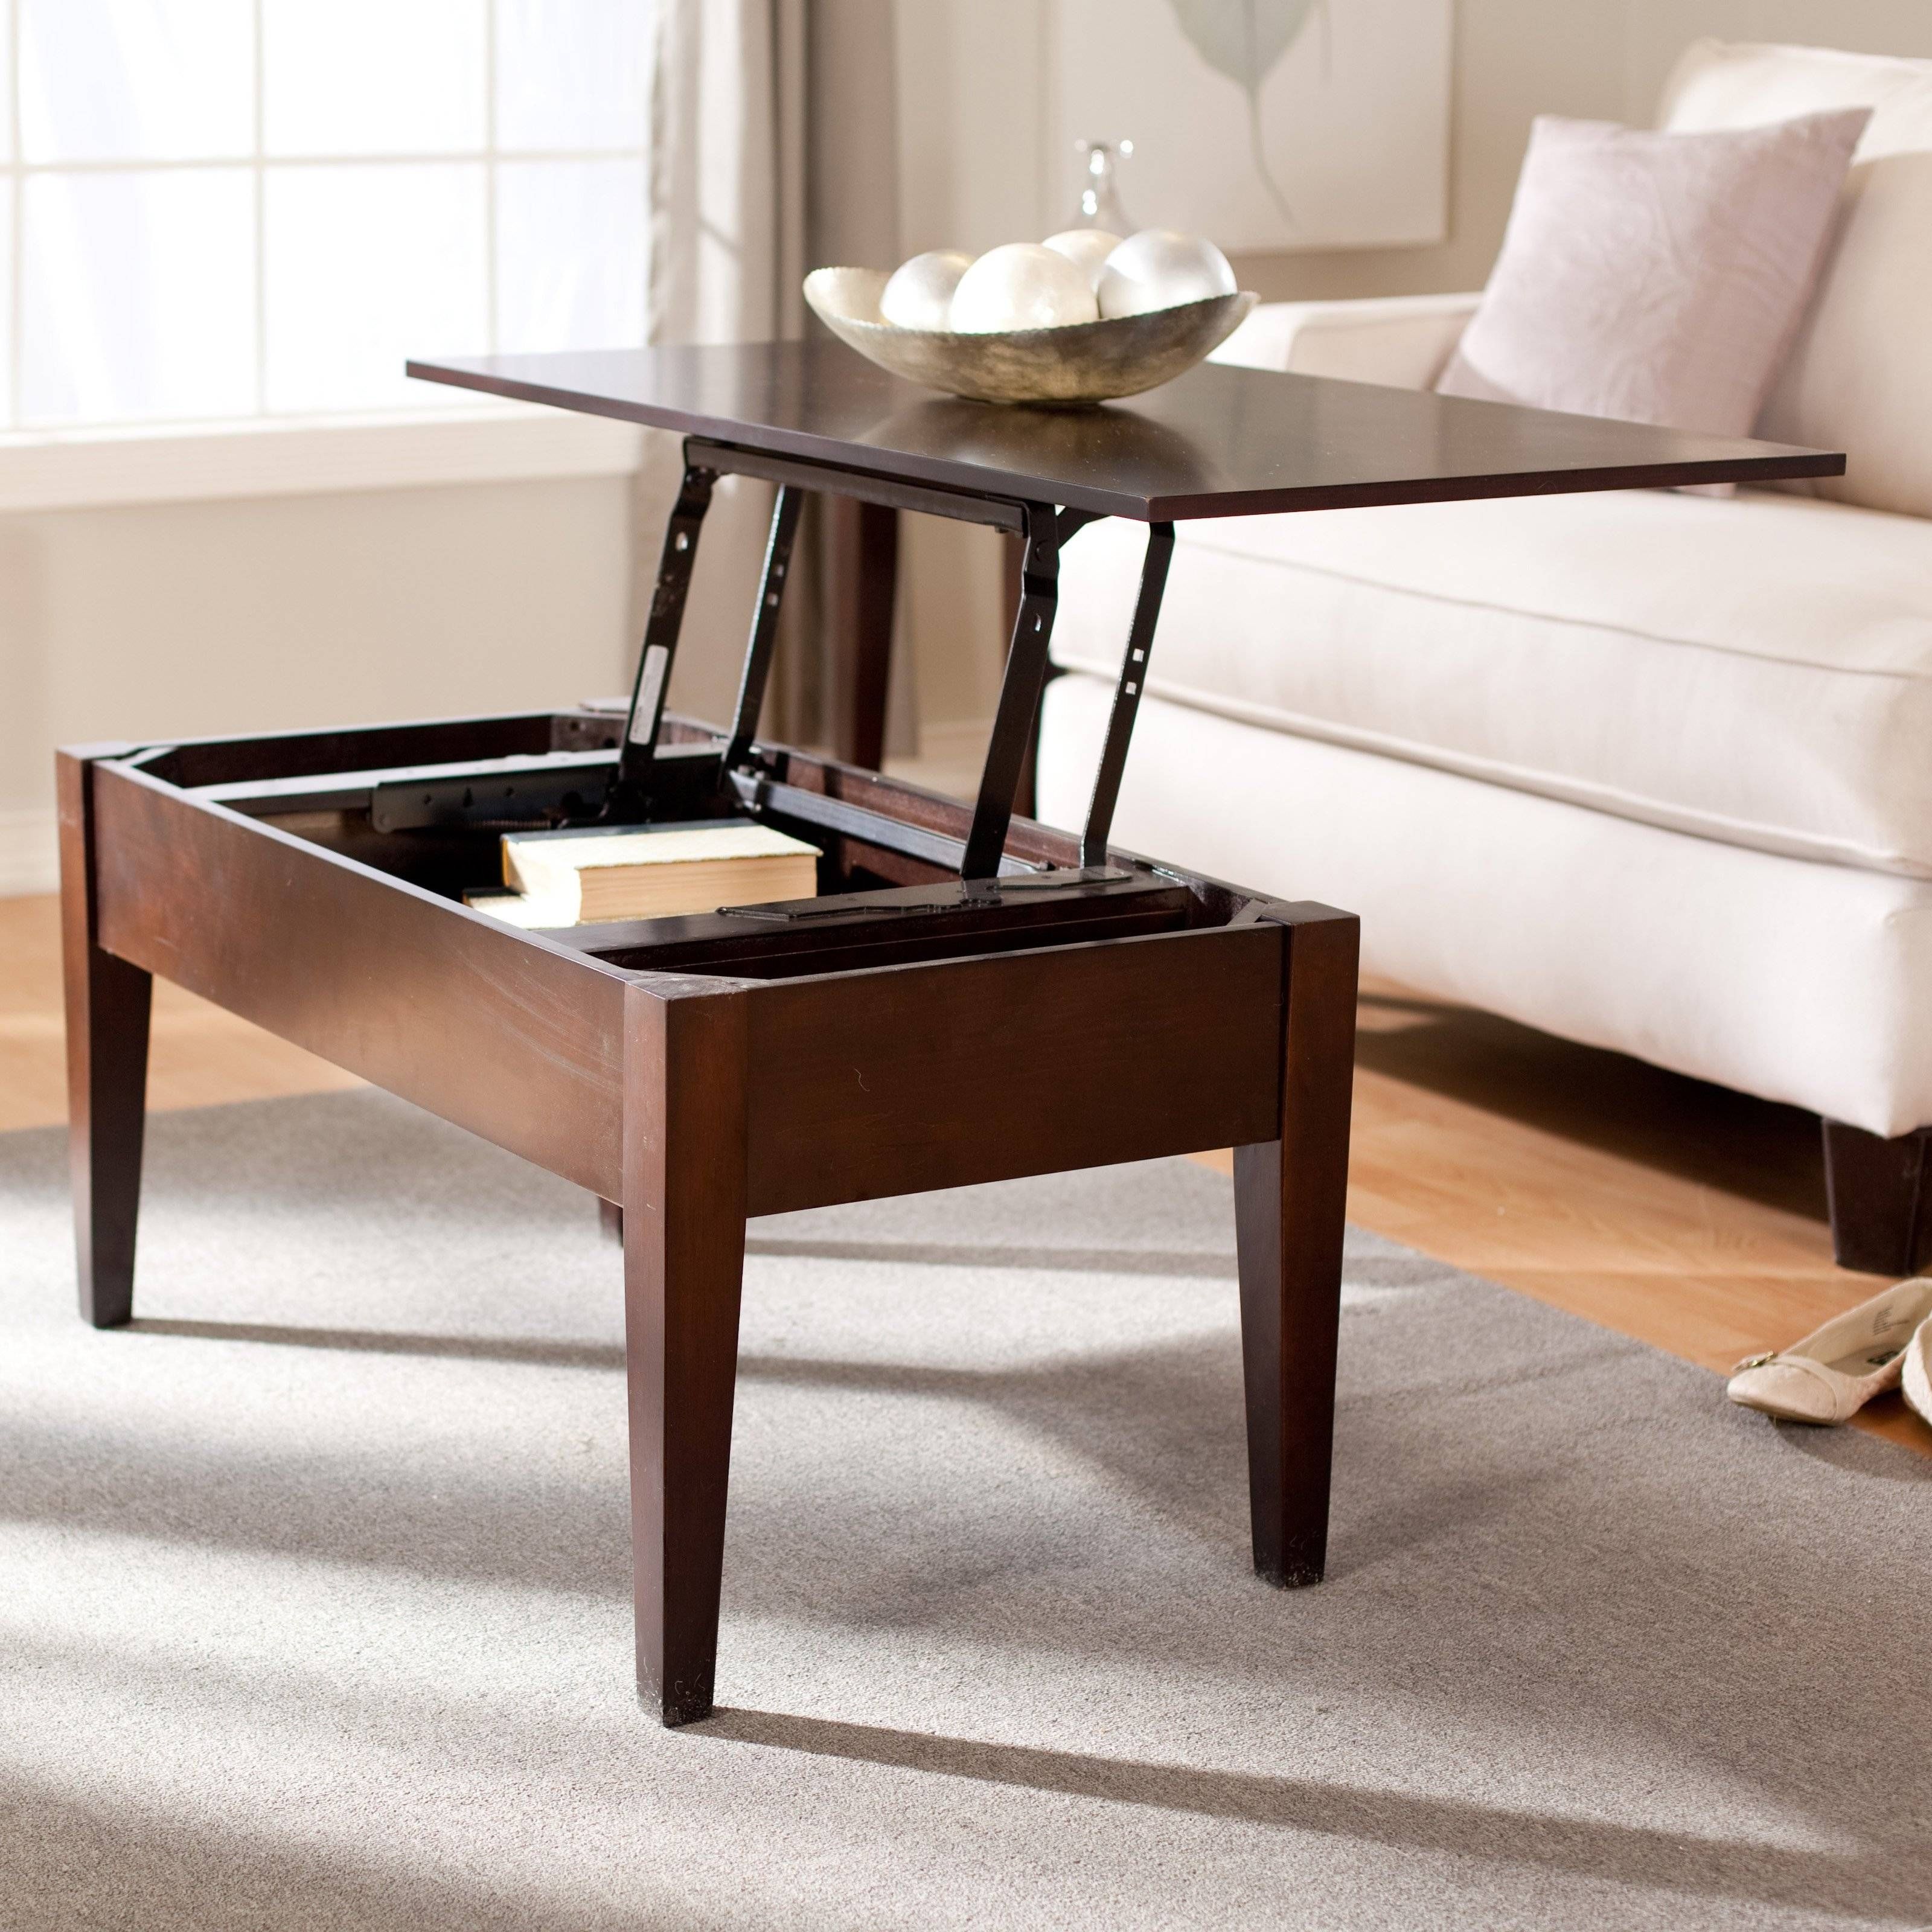 Turner Lift Top Coffee Table – Espresso | Hayneedle With Regard To Lift Top Coffee Tables With Storage (Photo 12 of 30)